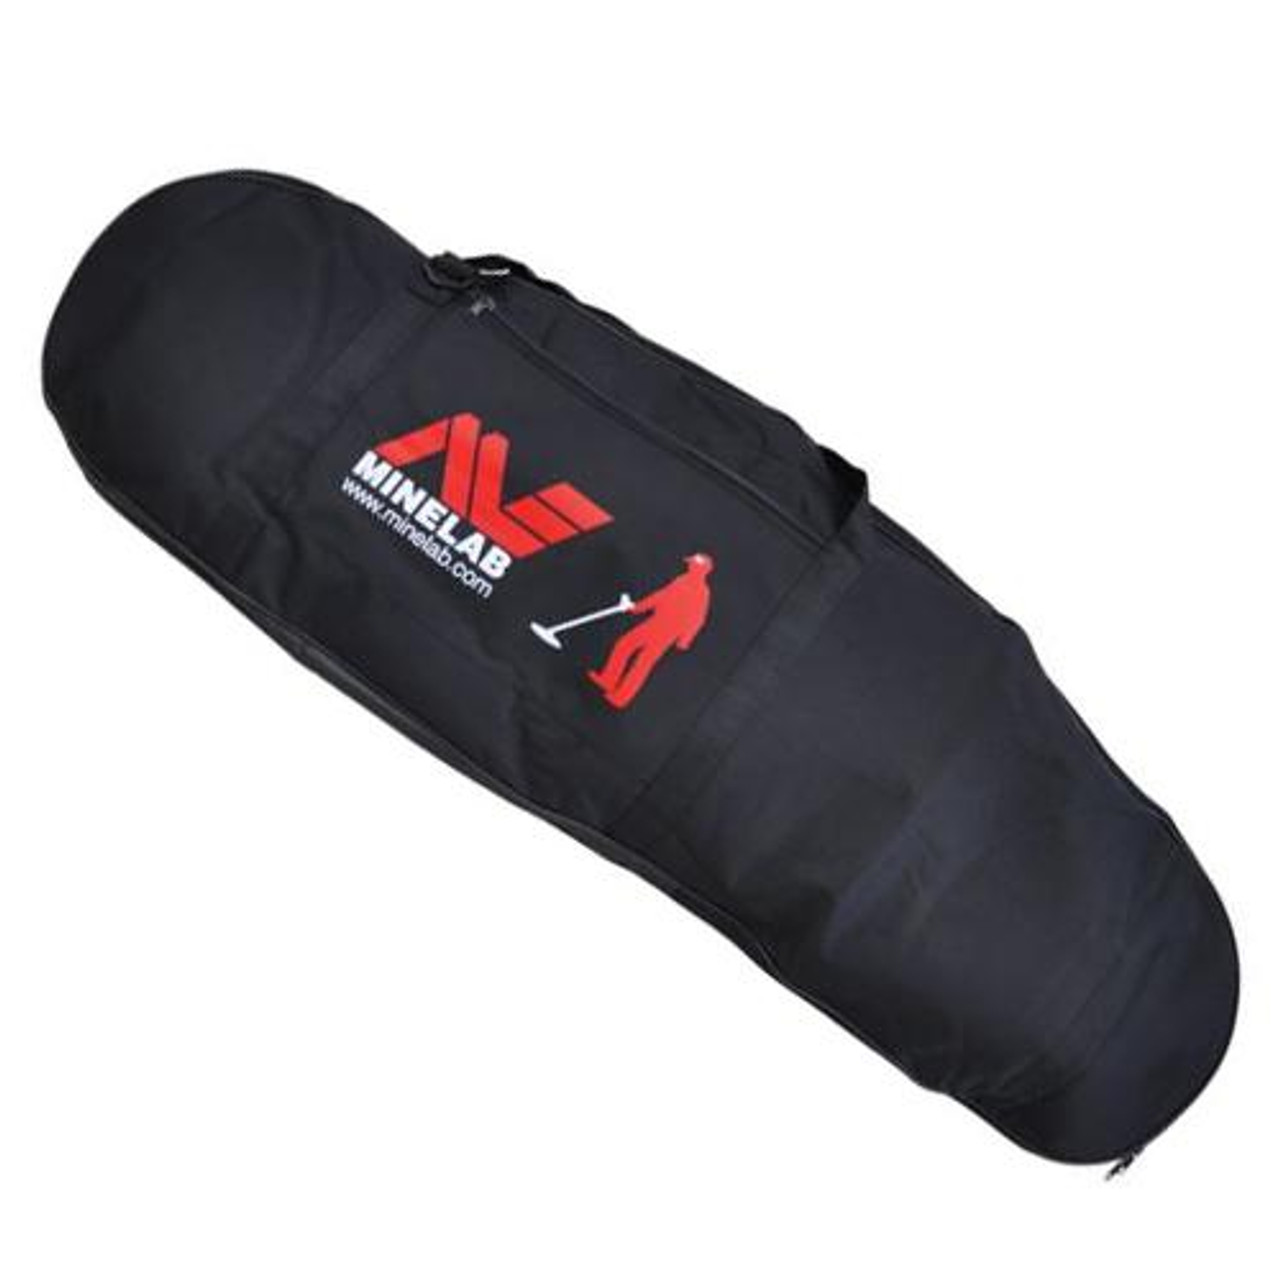 Minelab bag seems too big. Do you use a bag to store/carry your detector? :  r/metaldetecting